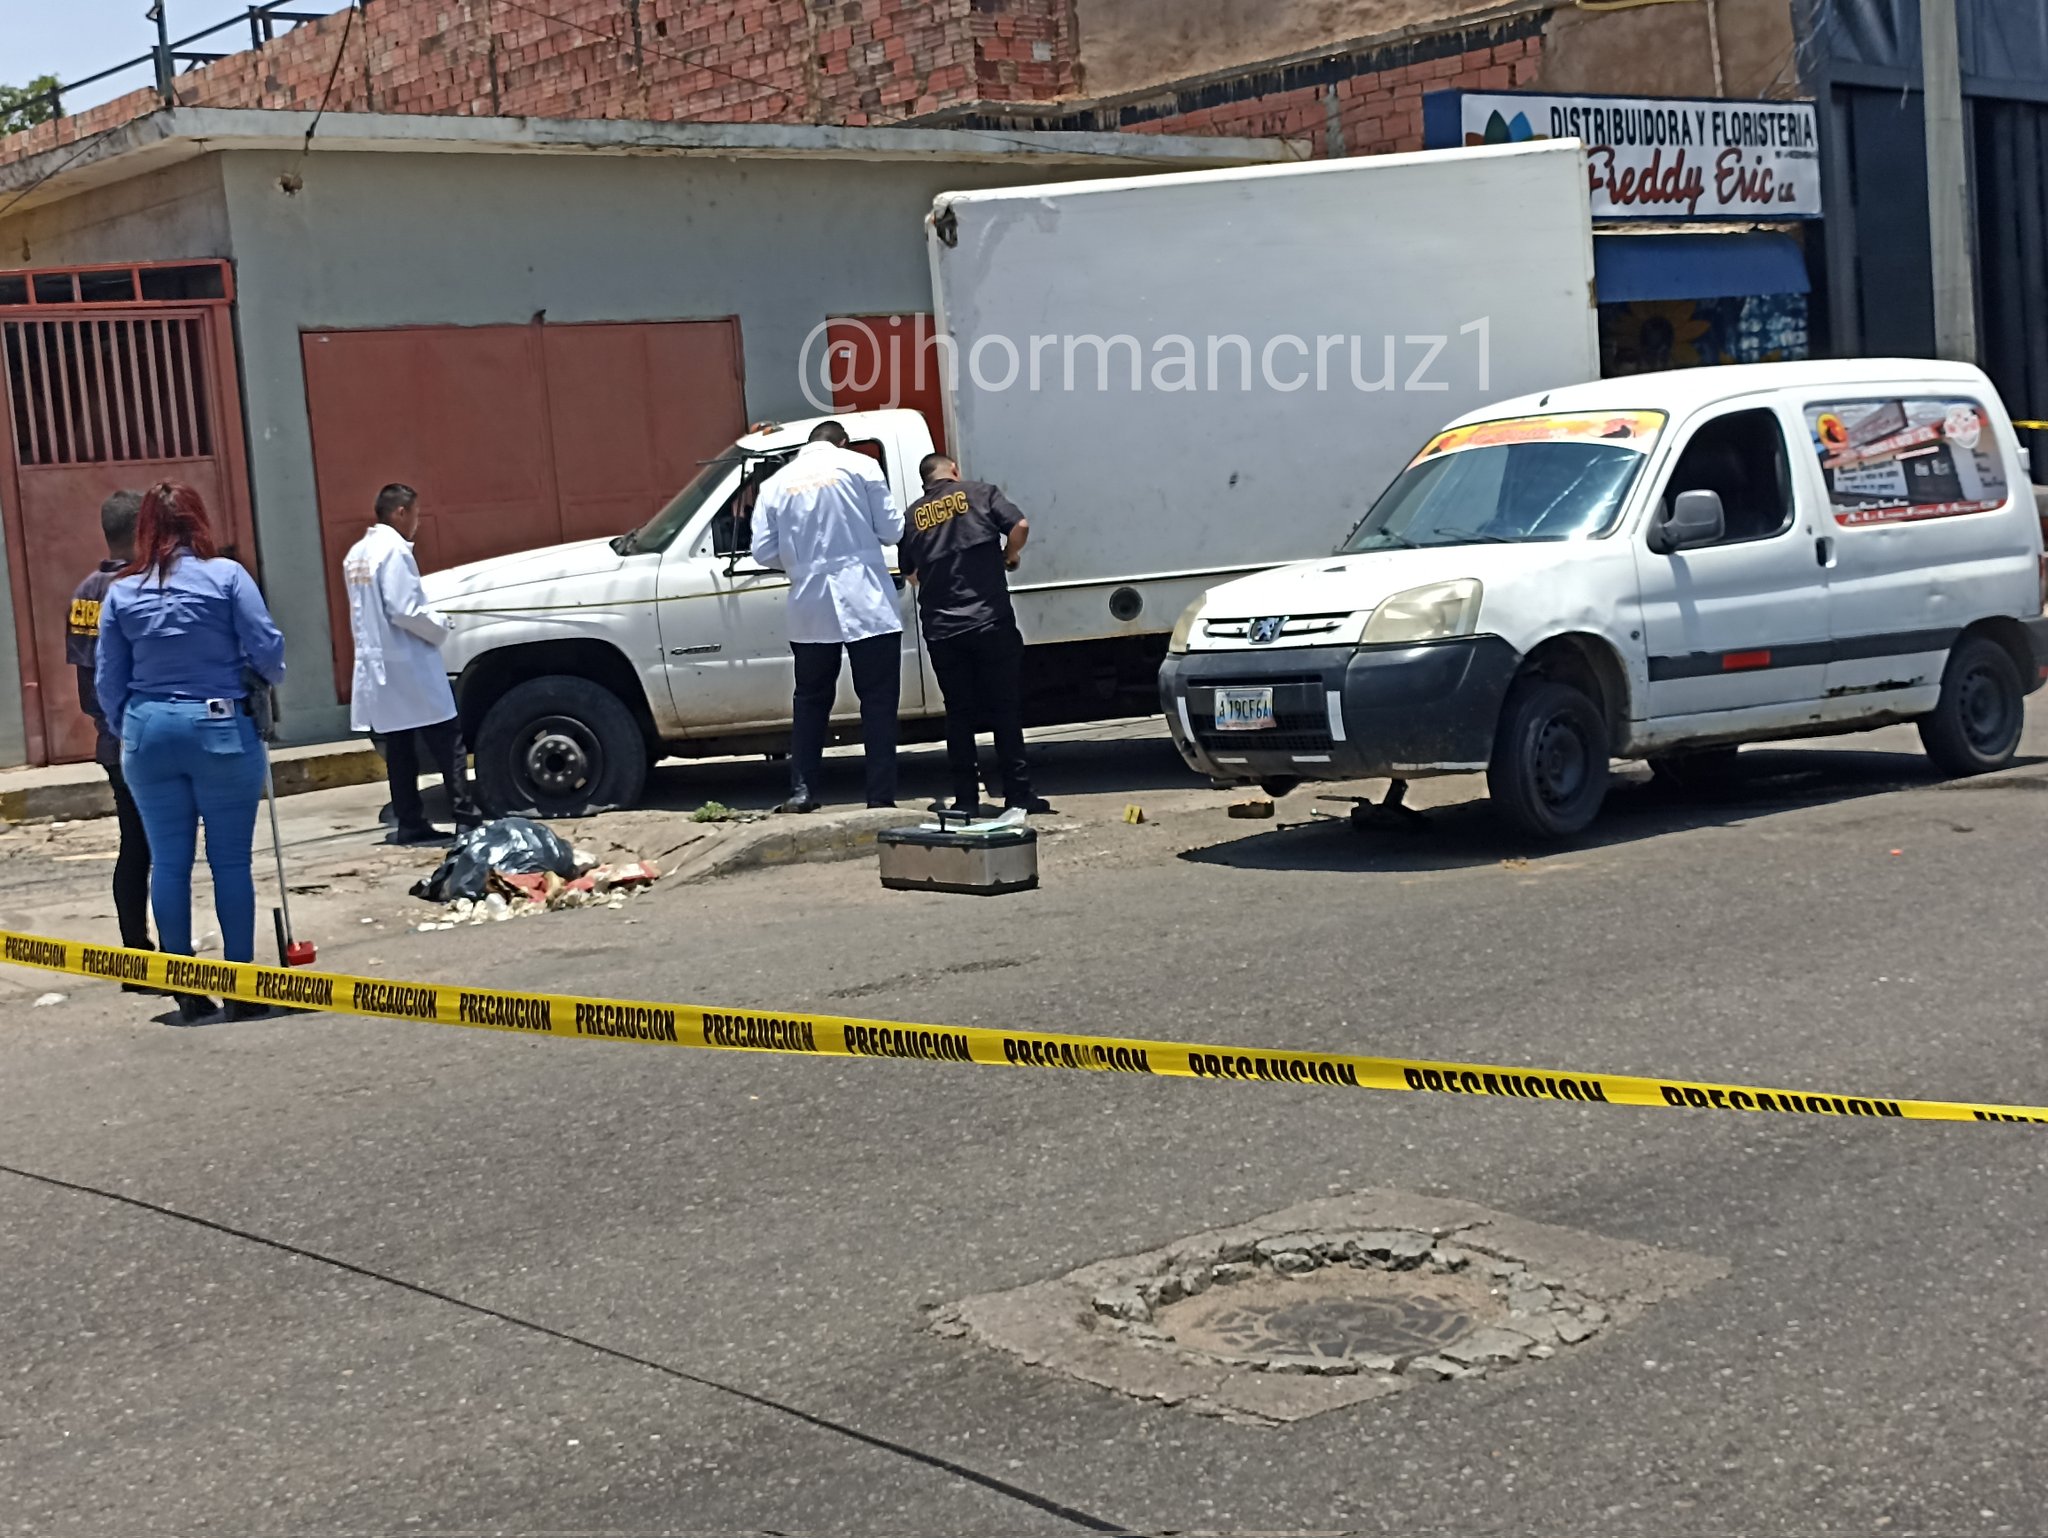 Unknown Individuals Throw an Improvised Explosive Device (IED) at a Business Establishment, Maracaibo, Zulia, Venezuela - 30 August 2023